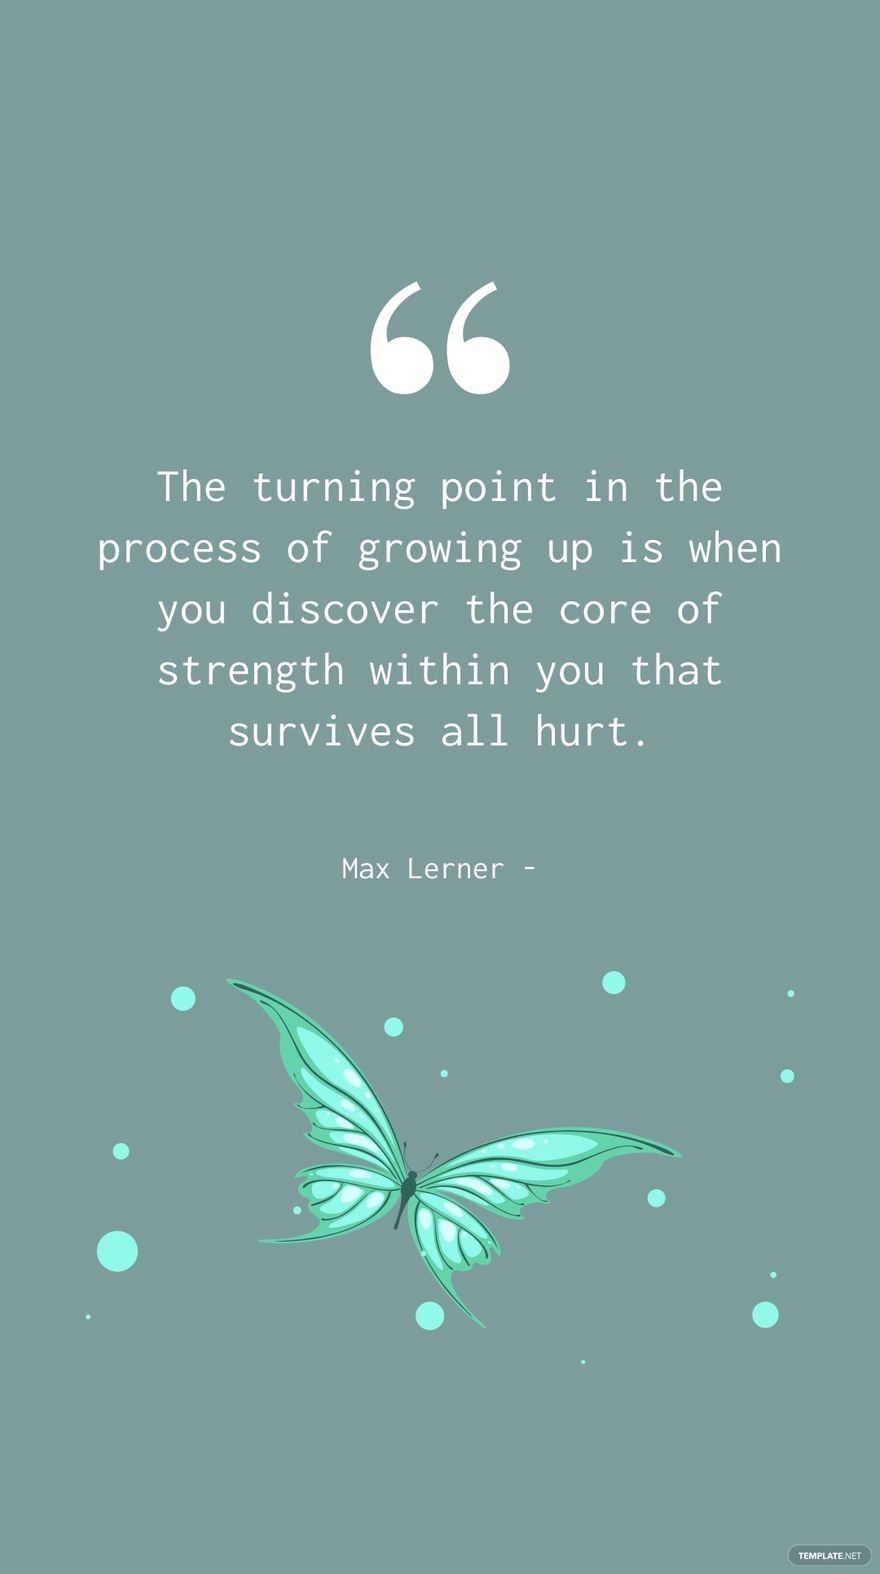 Max Lerner - The turning point in the process of growing up is when you discover the core of strength within you that survives all hurt.